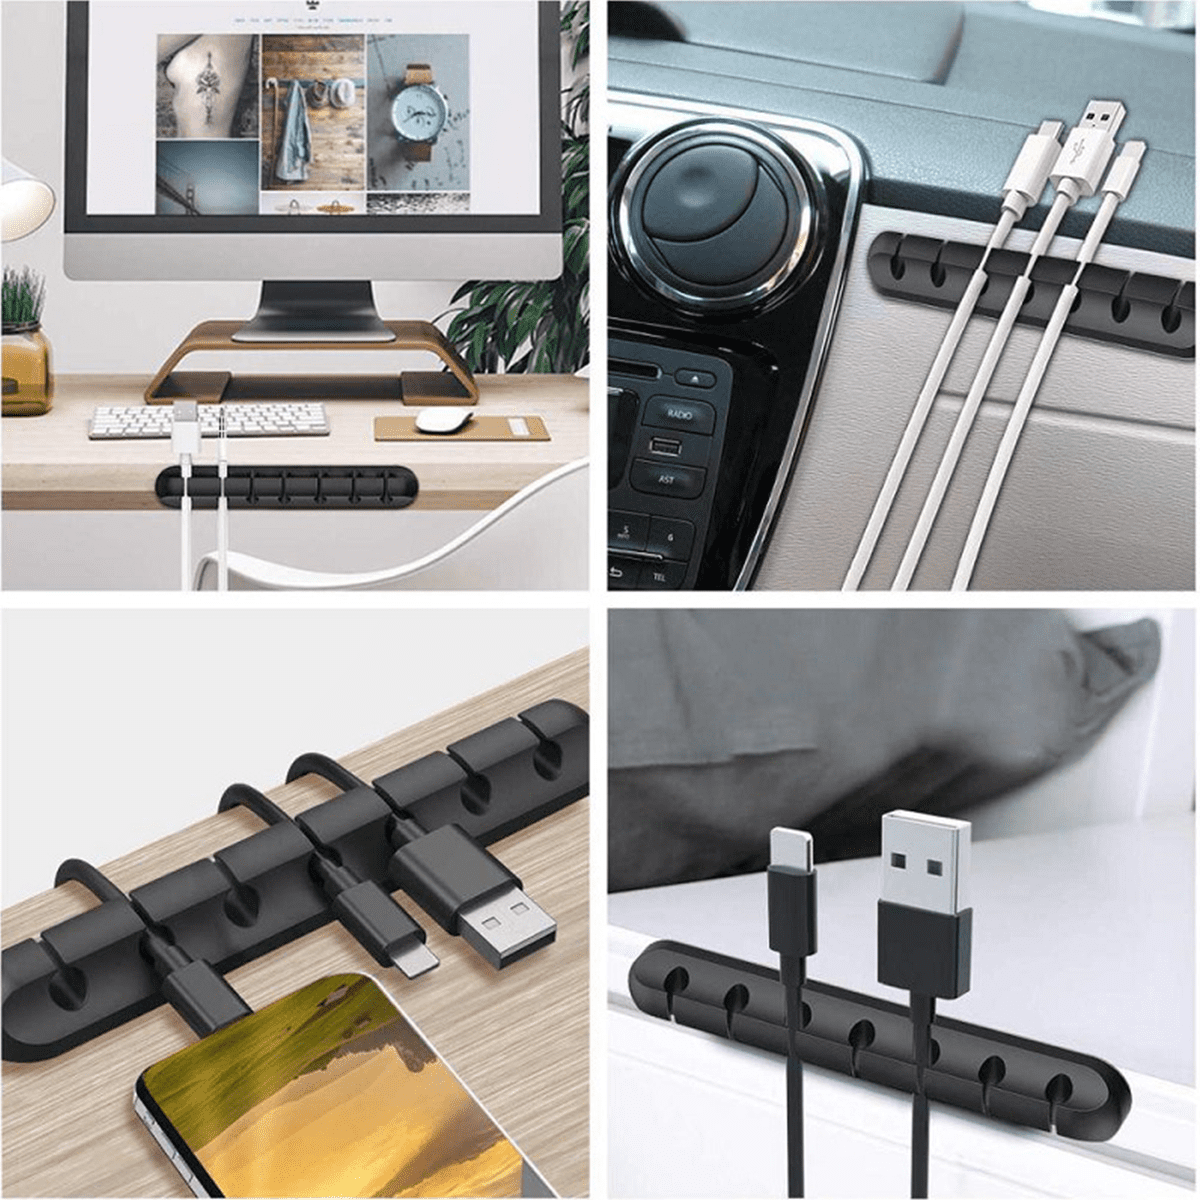 Cable Management Clips in BLACK, Cable Tidy, Cable Tidies, Travel  Accessories, Home Office Organisation, Desk Tidy, Gift for Dad, Dads Gifts  